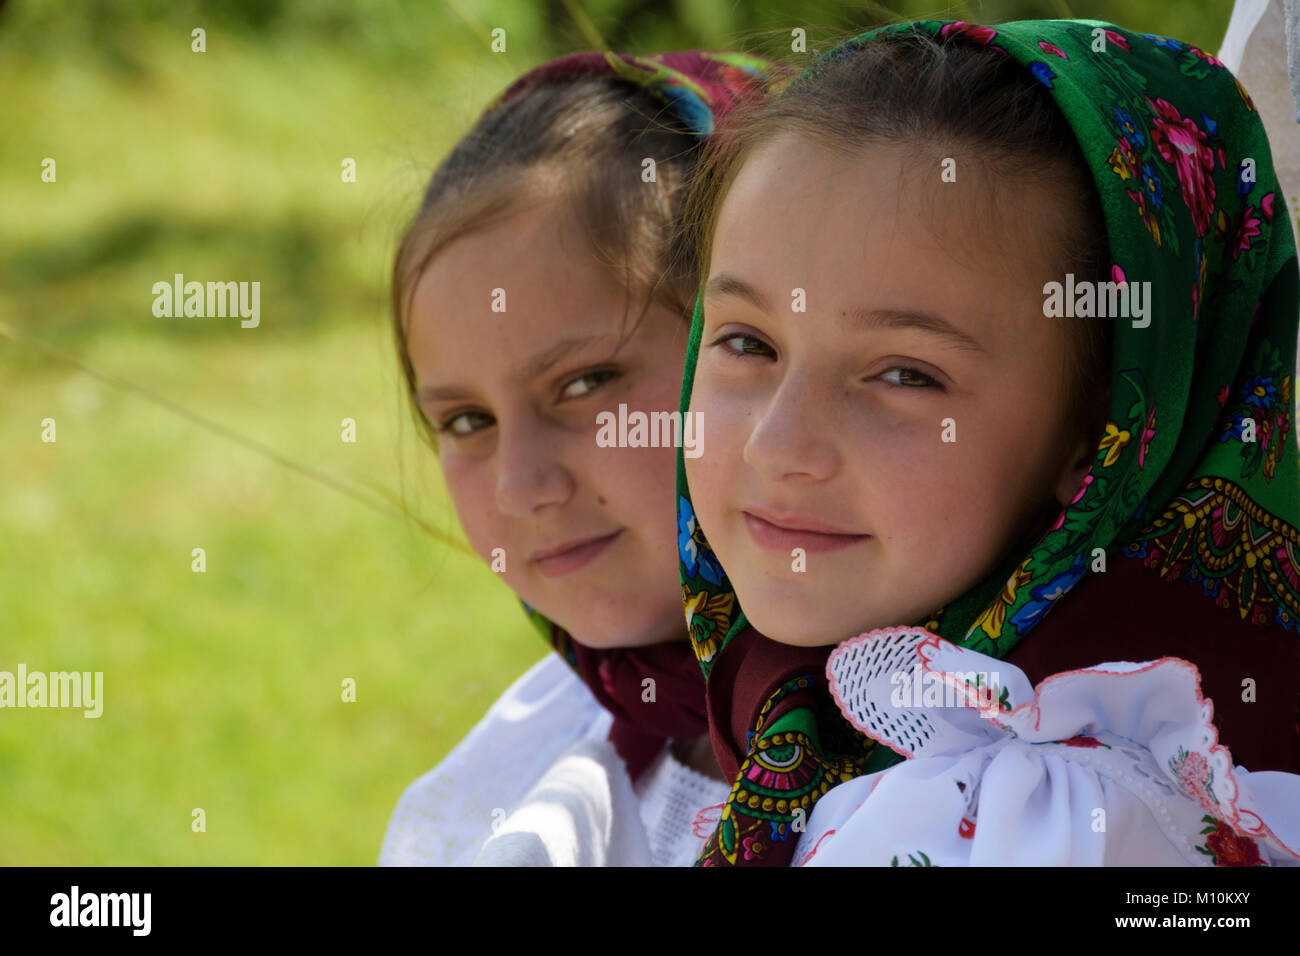 Romania, Maramures County, Village of Breb.Procession in honour of St. Paul, end of june. Two young girls with headscarf Stock Photo